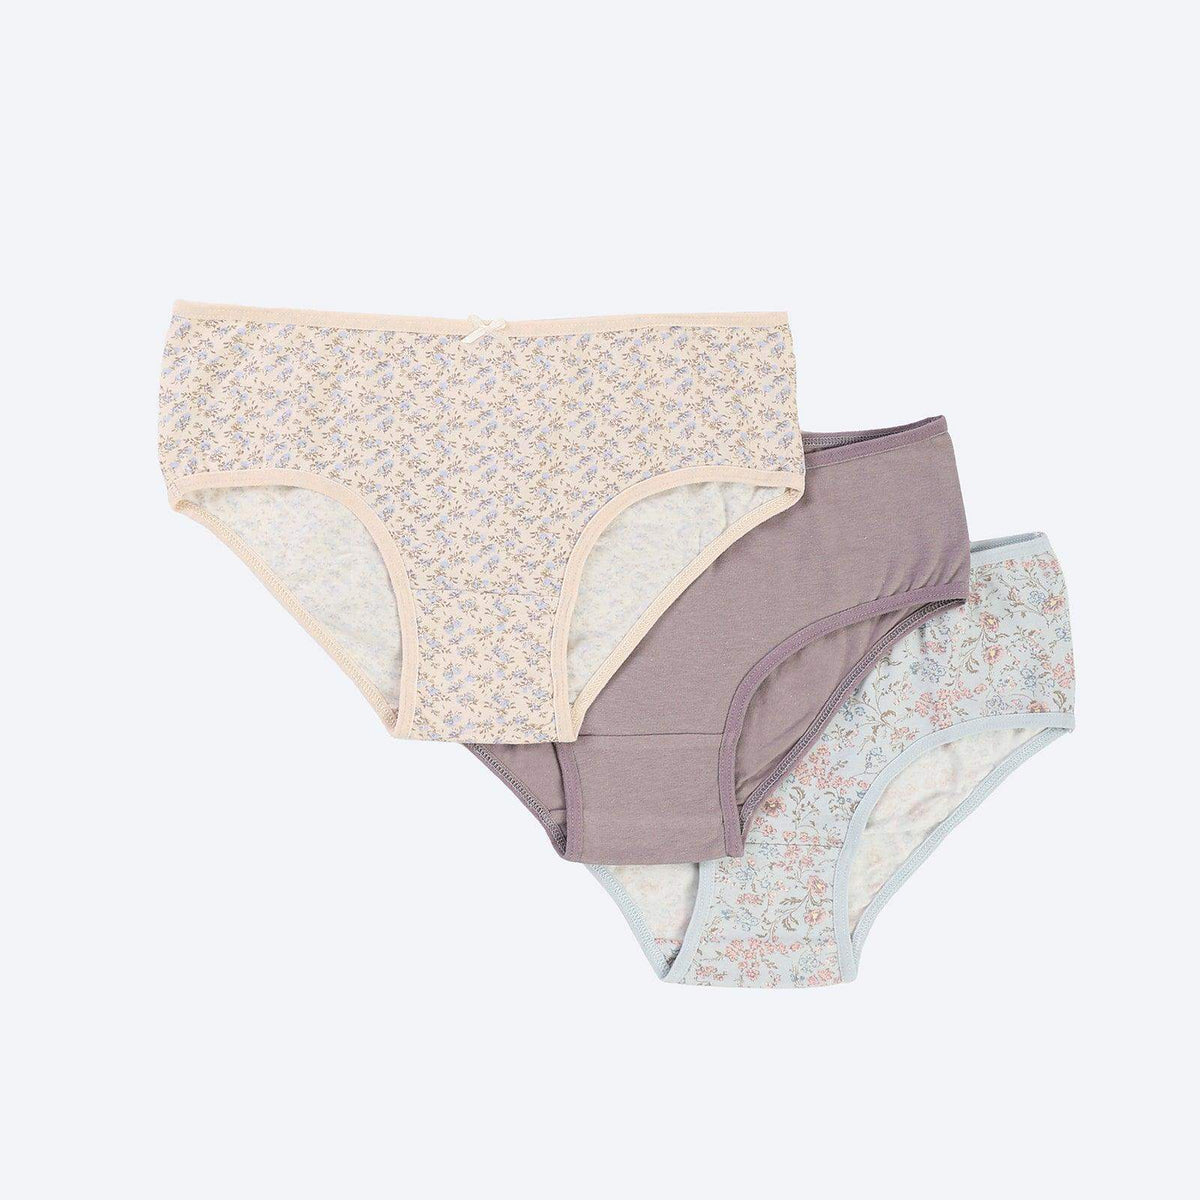 Carina Pack Of 7 Brief Panties For Girls @ Best Price Online